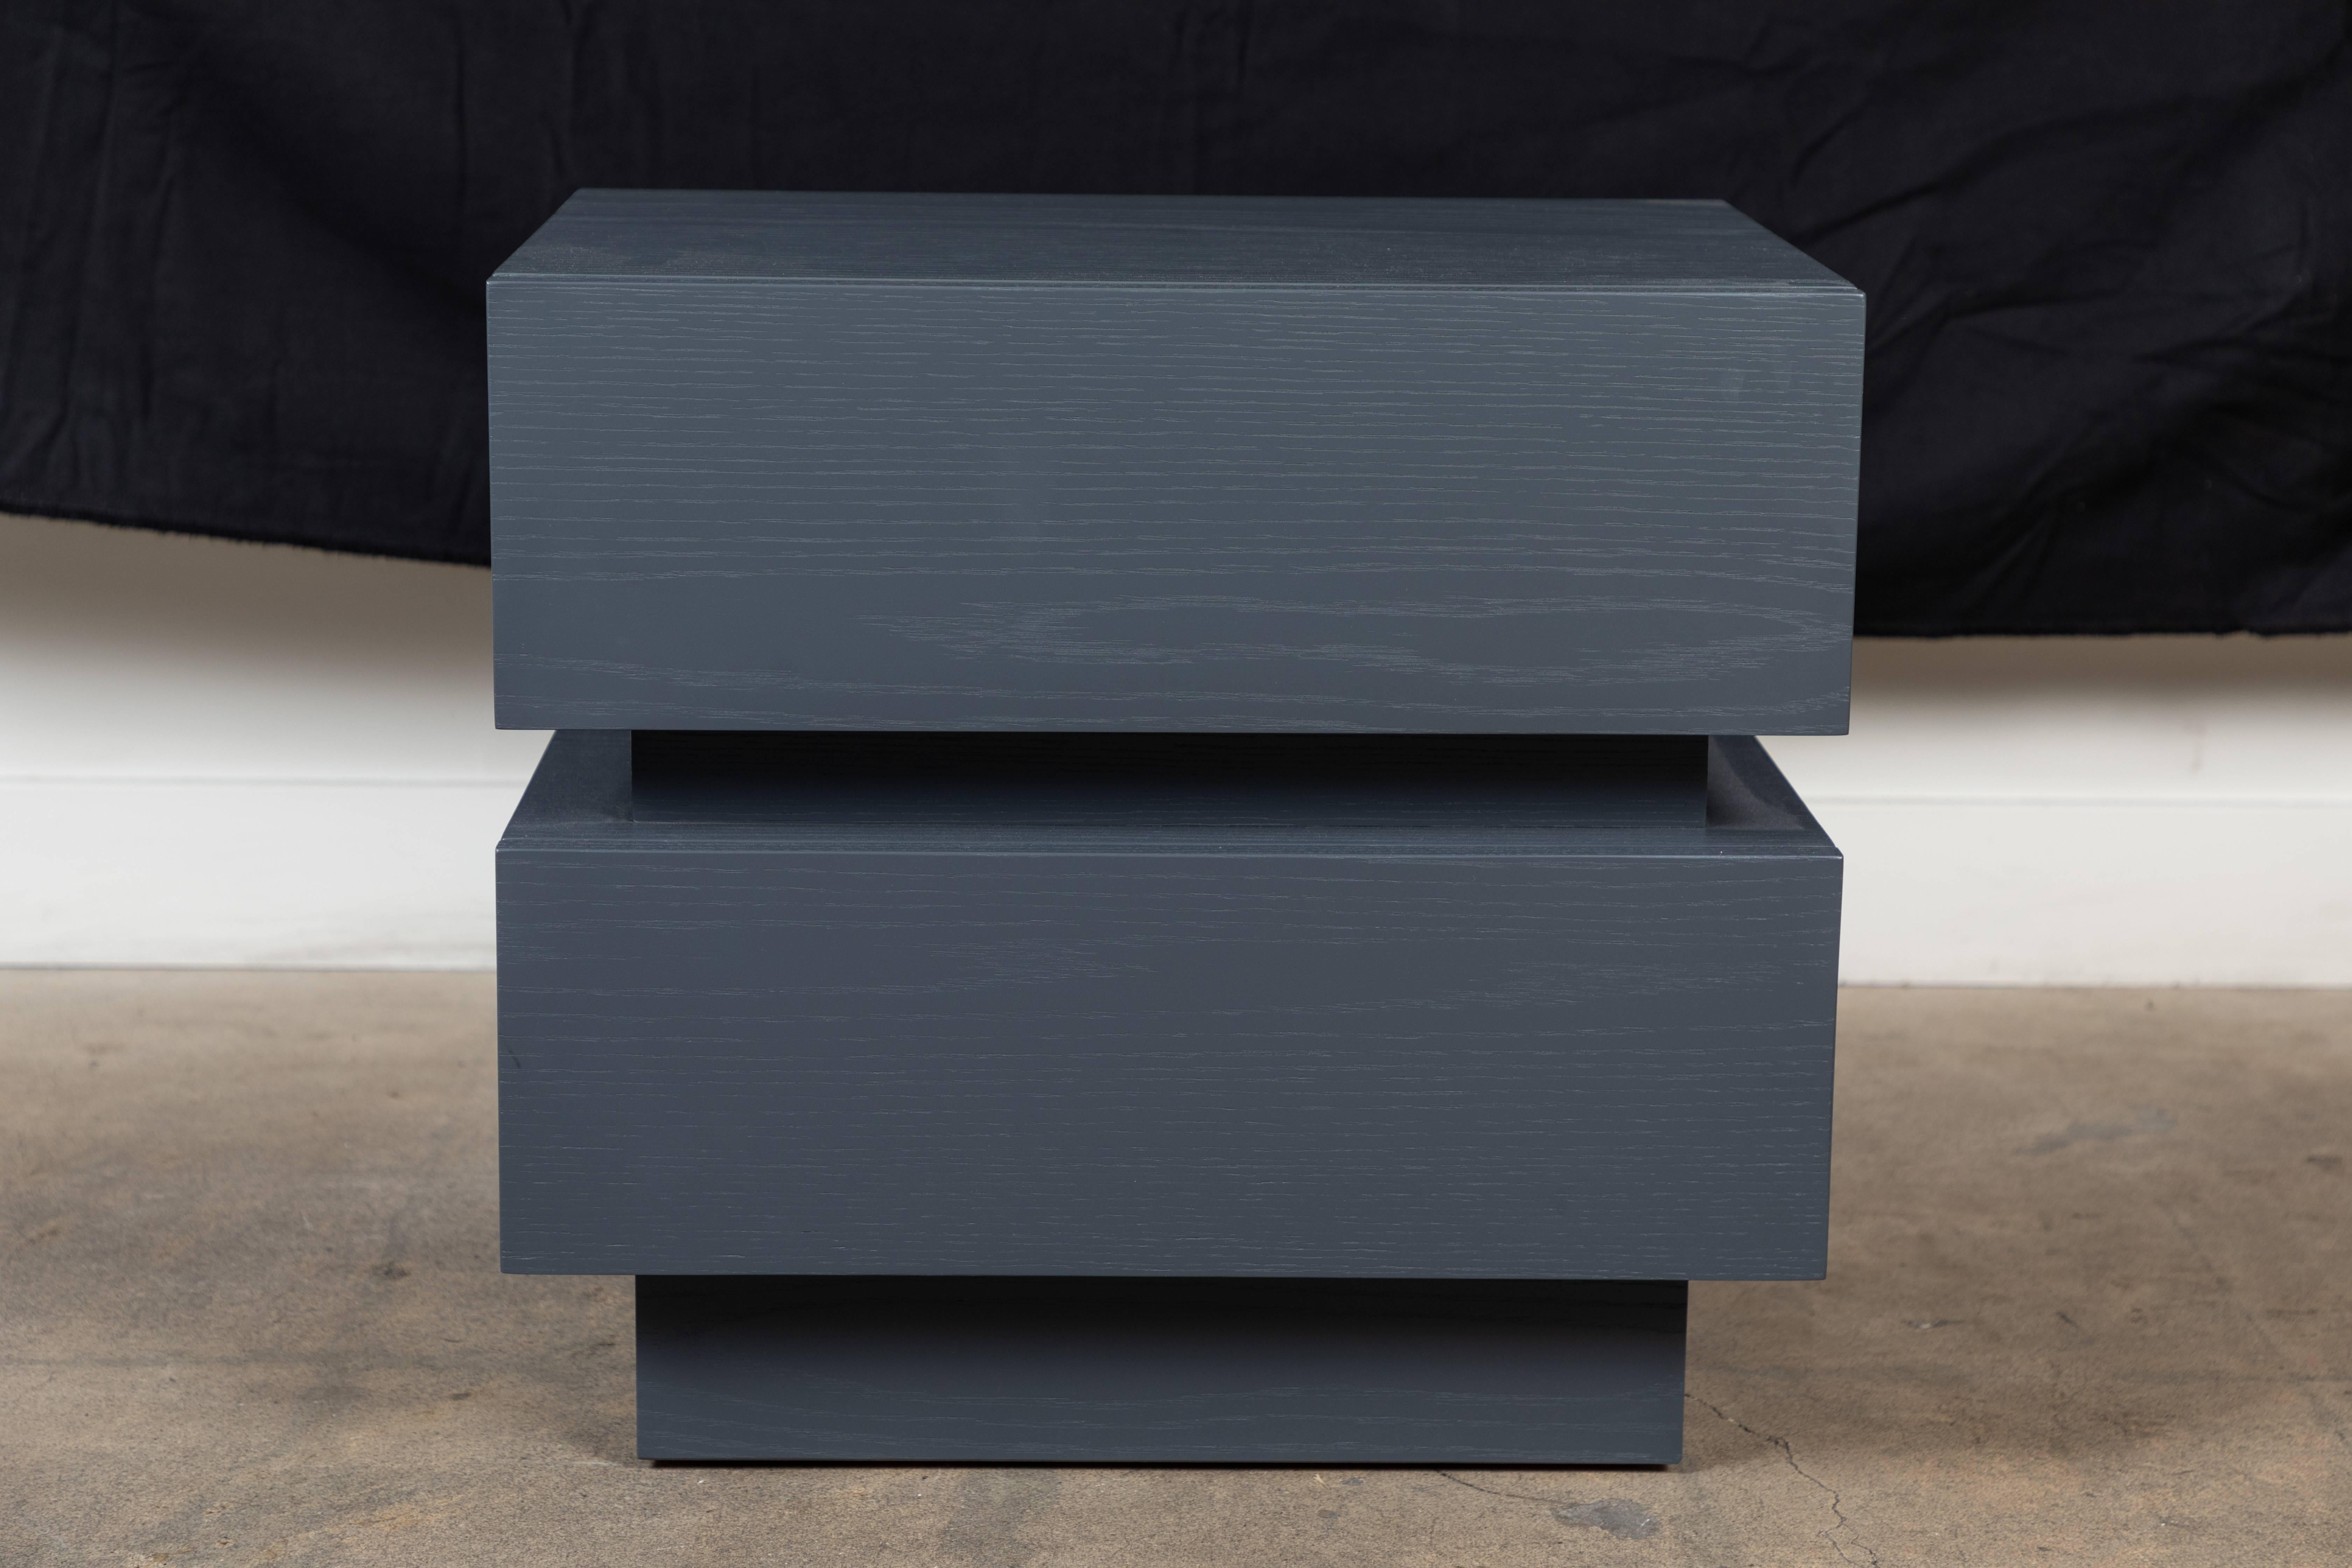 Pair of small stacked box nightstands by Lawson-Fenning

Available to order in various finishes with a 10-12 week lead time.